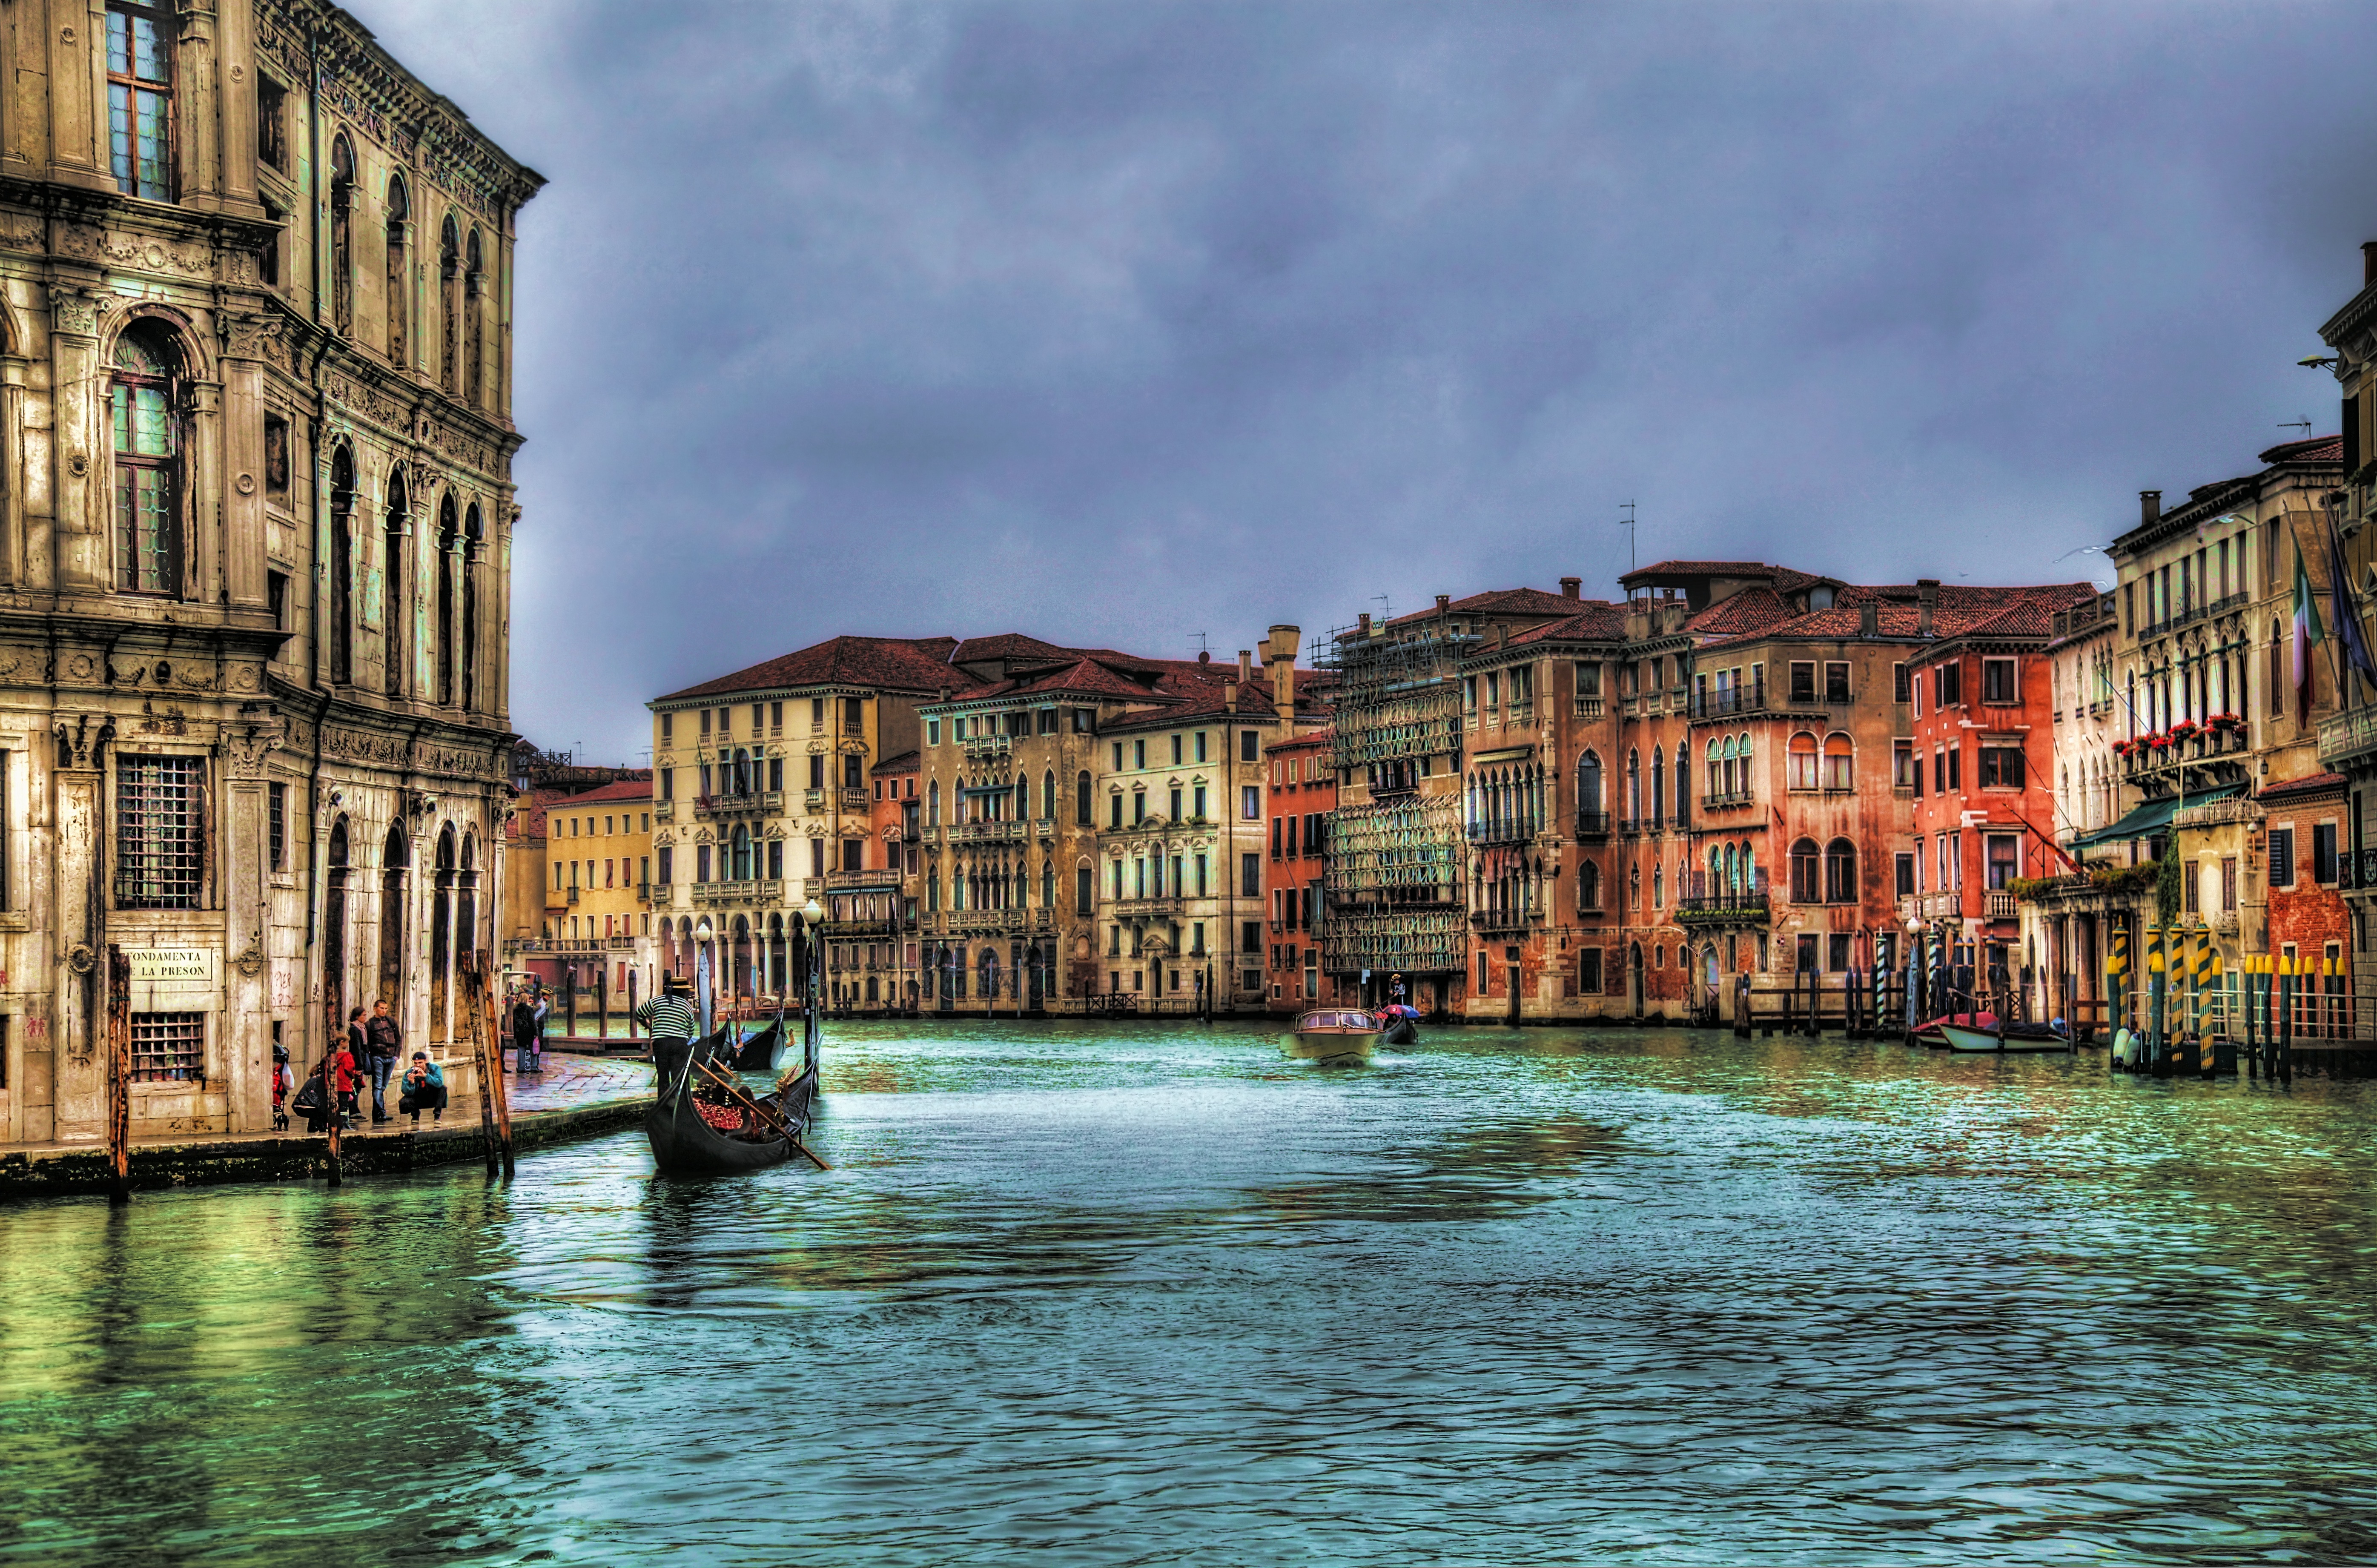 man made, venice, boat, colorful, grand canal, house, italy, cities